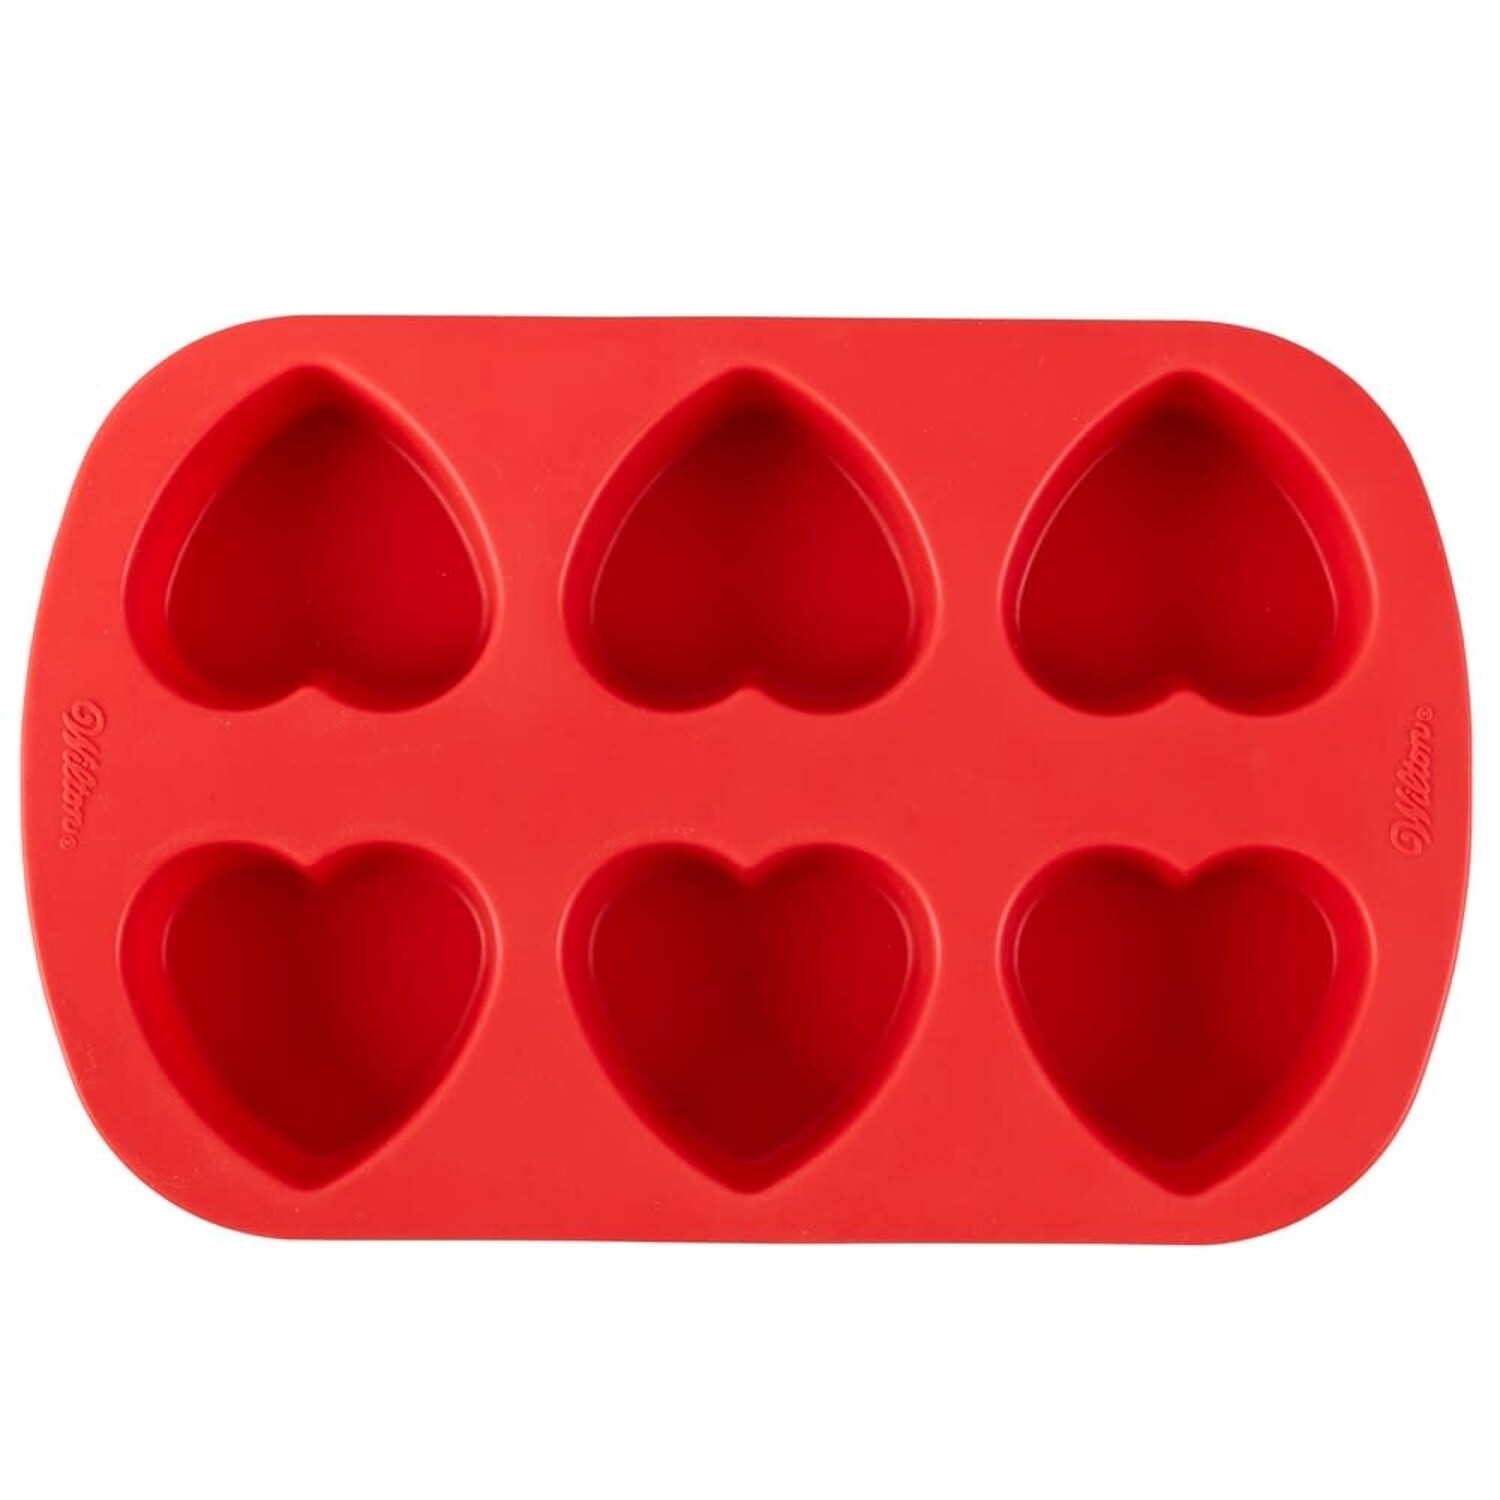 Wilton 2-Piece Silicone Heart Pan Set, Red/Pink